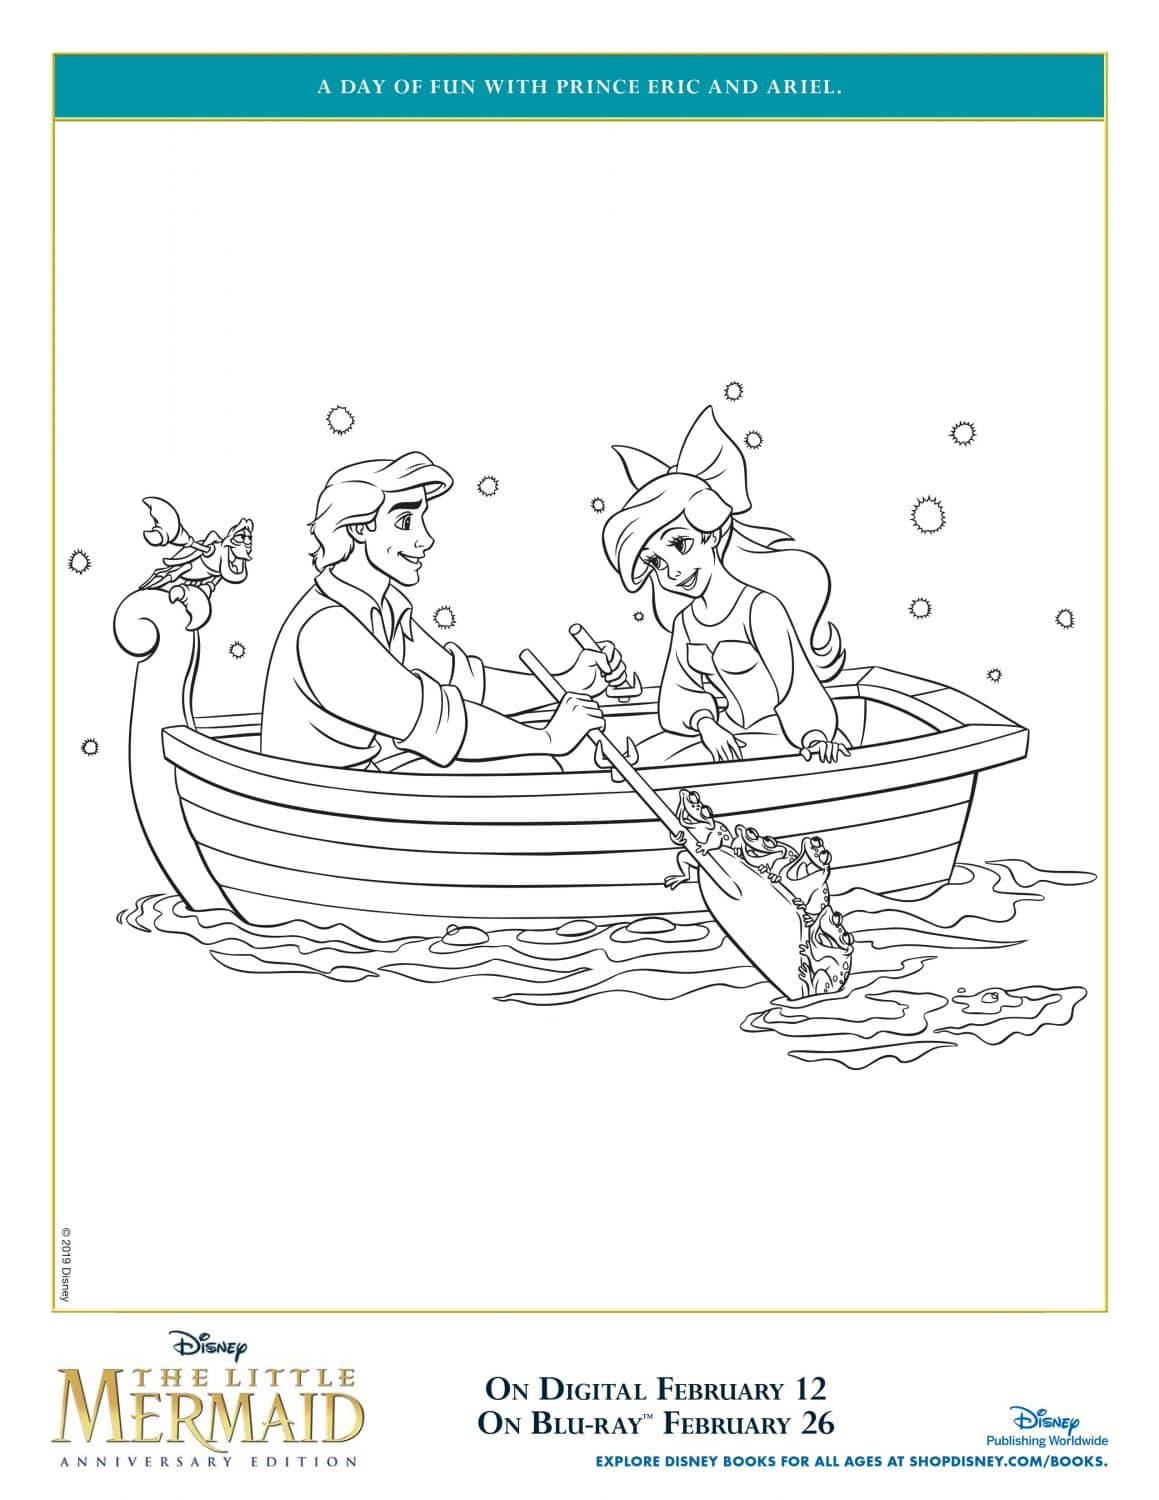 Eric and Ariel The Little Mermaid Coloring Page